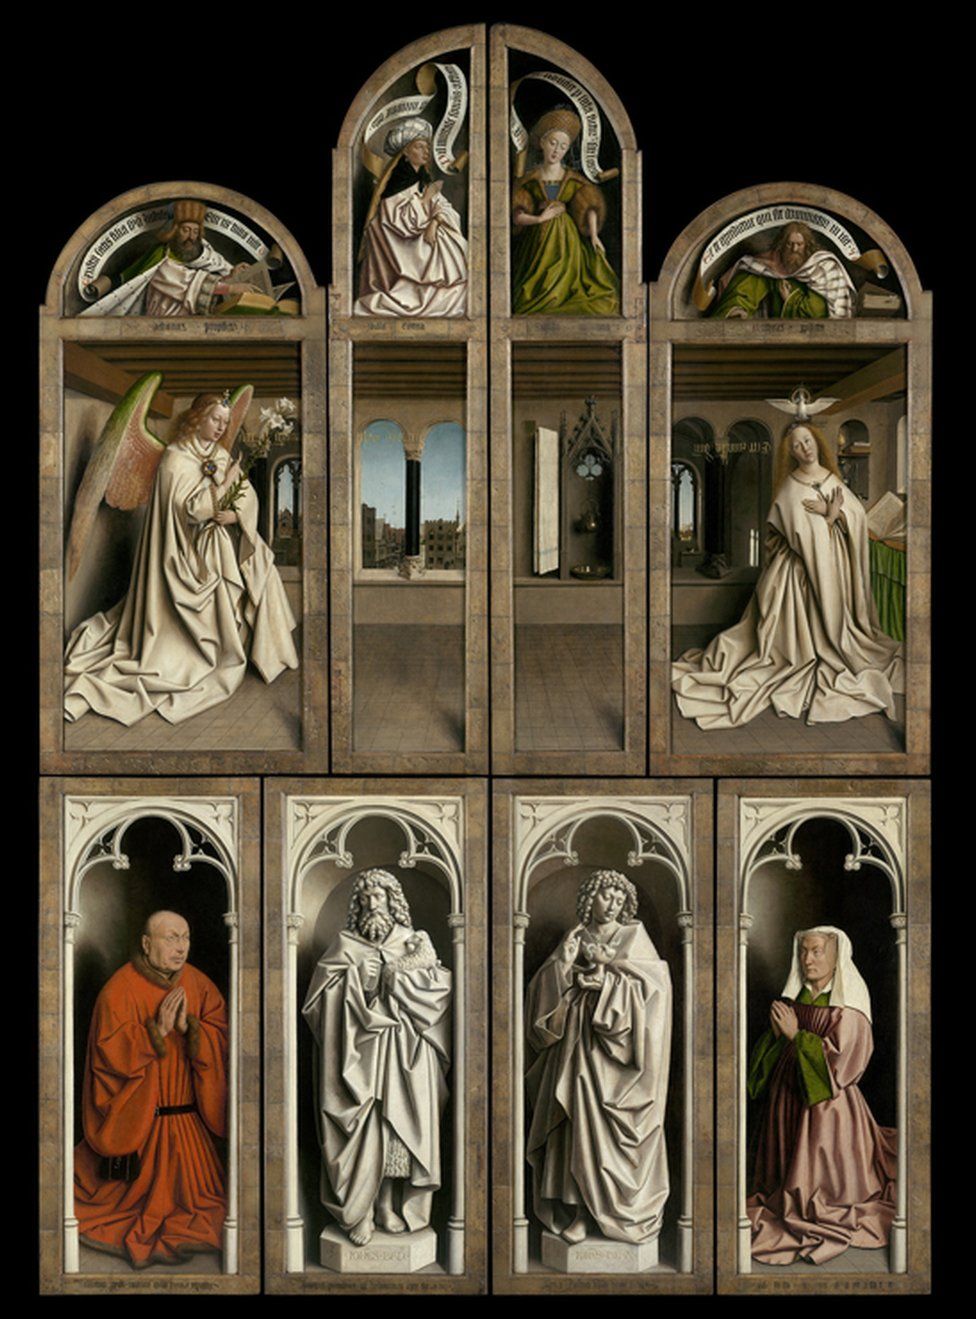 The Adoration of the Mystic Lamb, 1432 (better known as the Ghent Altarpiece), which was painted by Jan and Hubert van Eyck, is considered to be one of the world's most significant works of art